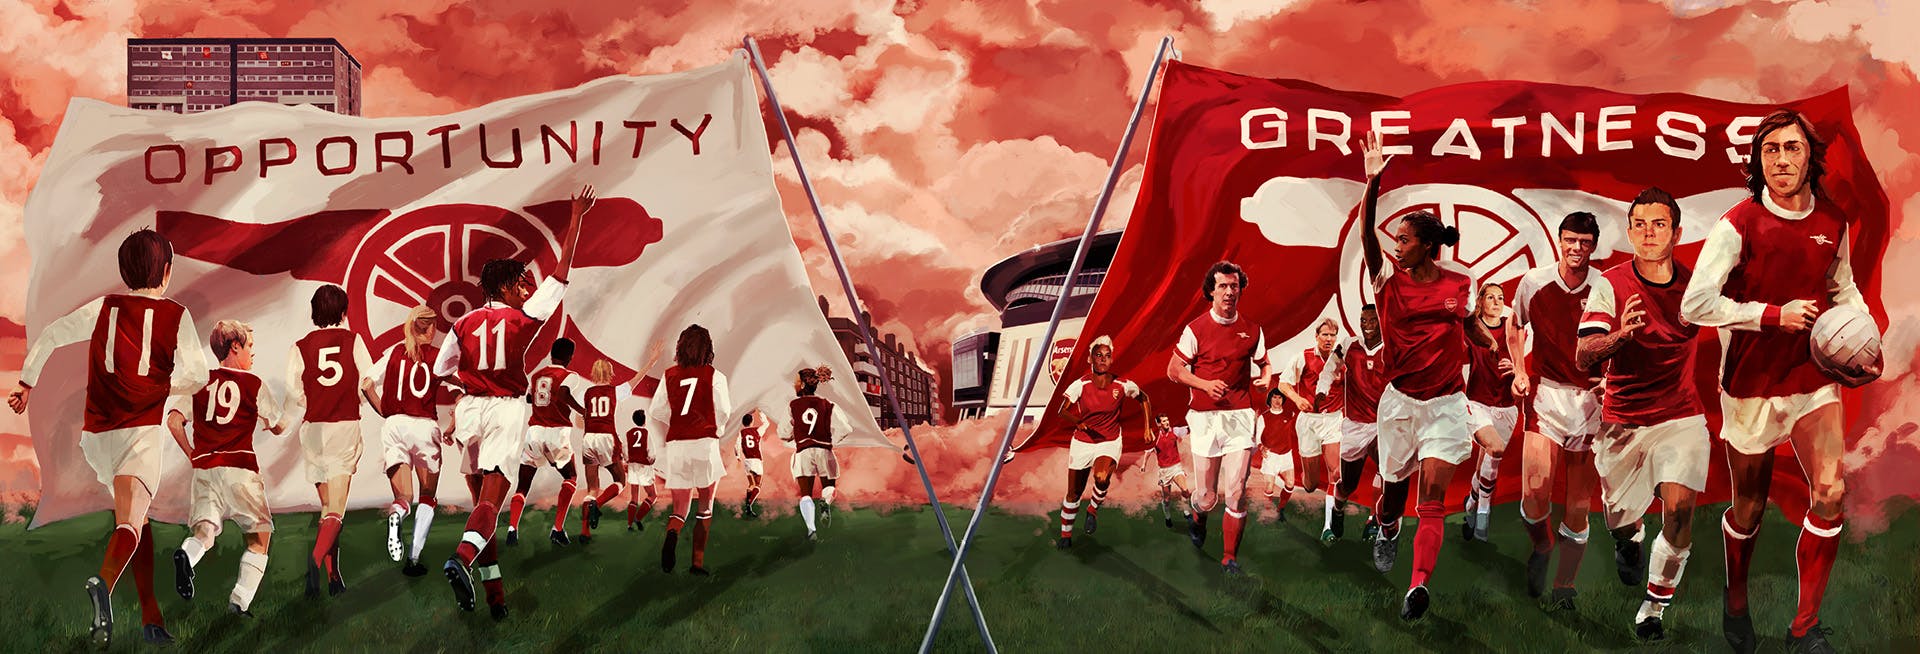 Artwork by Reuben Dangoor showing iconic figures from the club's history marching on grass bearing flags that read 'opportunity' and 'greatness'